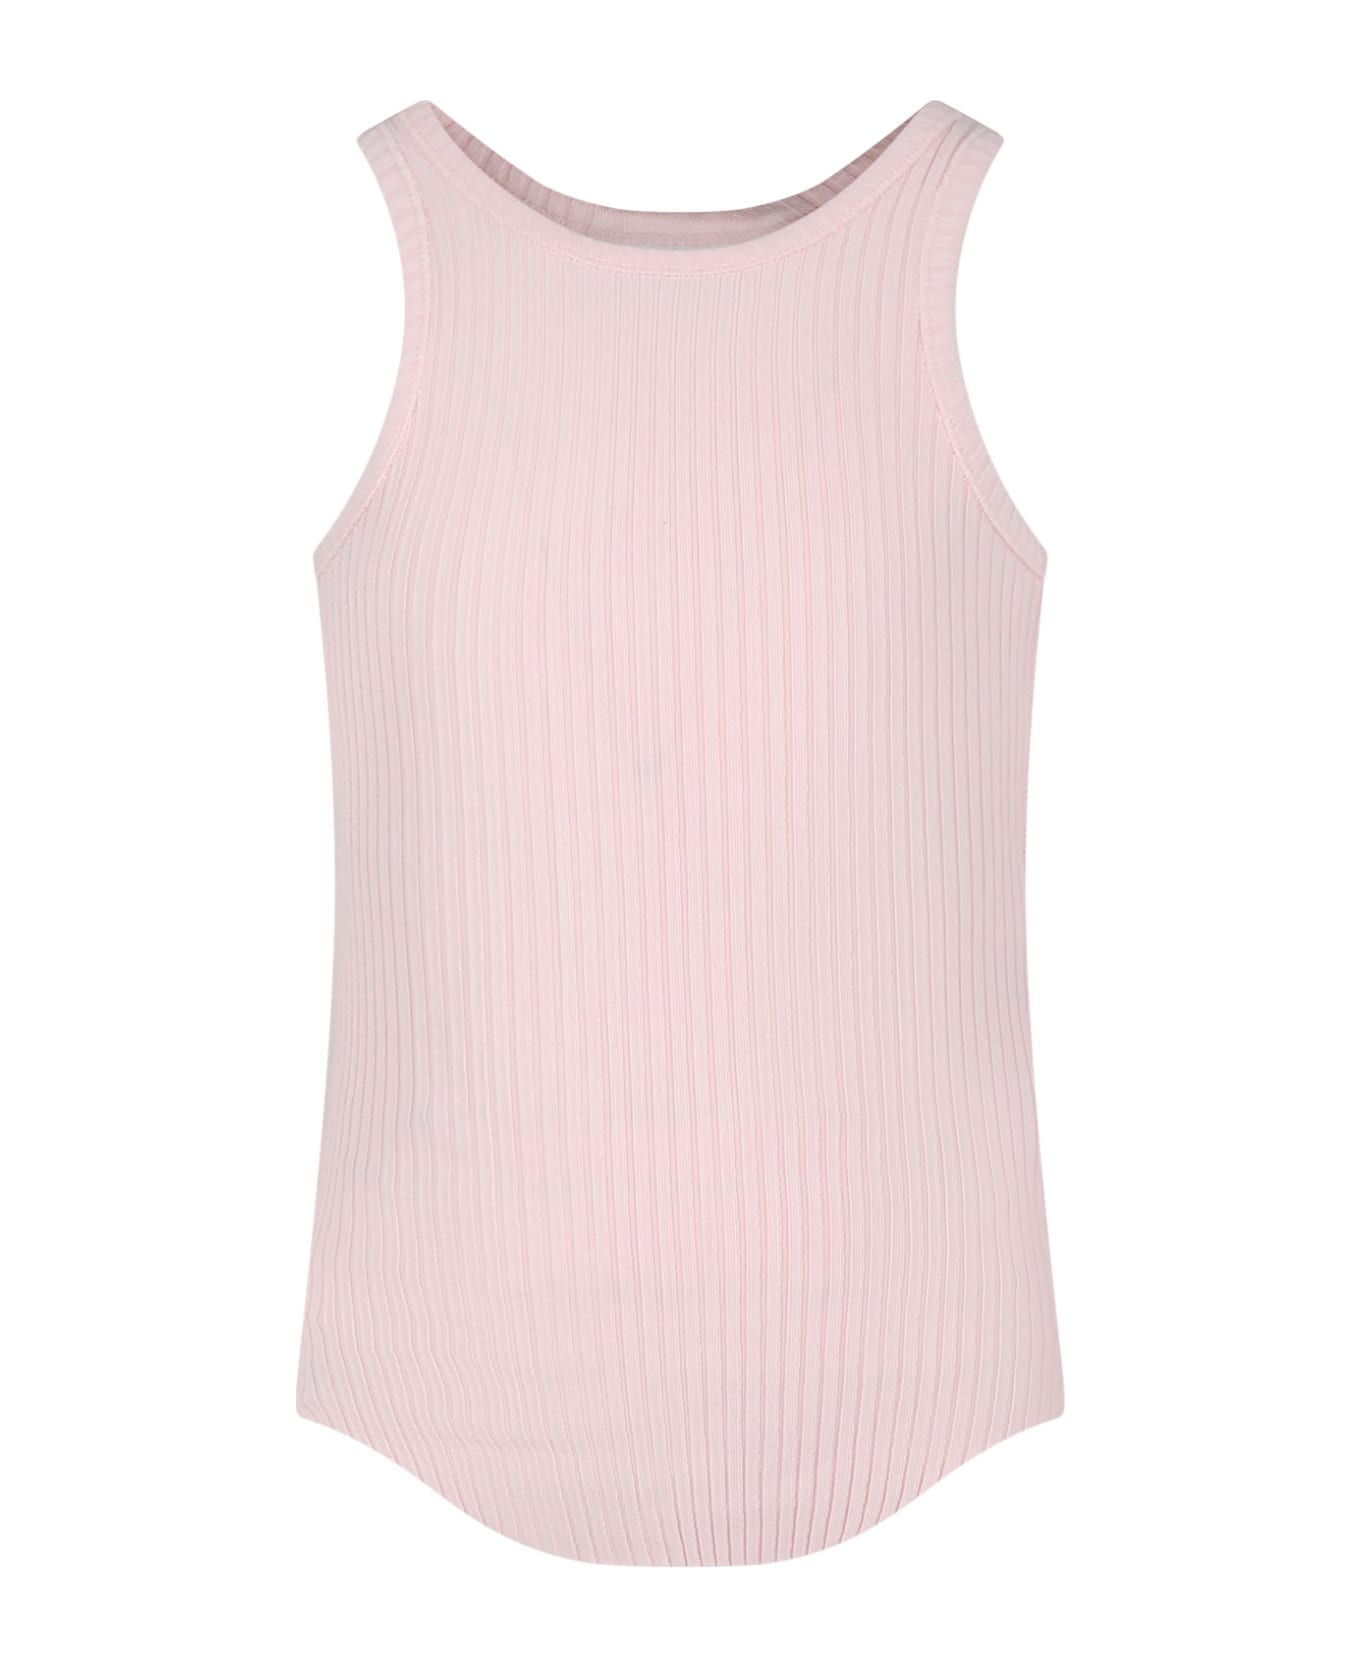 Molo Pink Tank Top For Girl - Pink